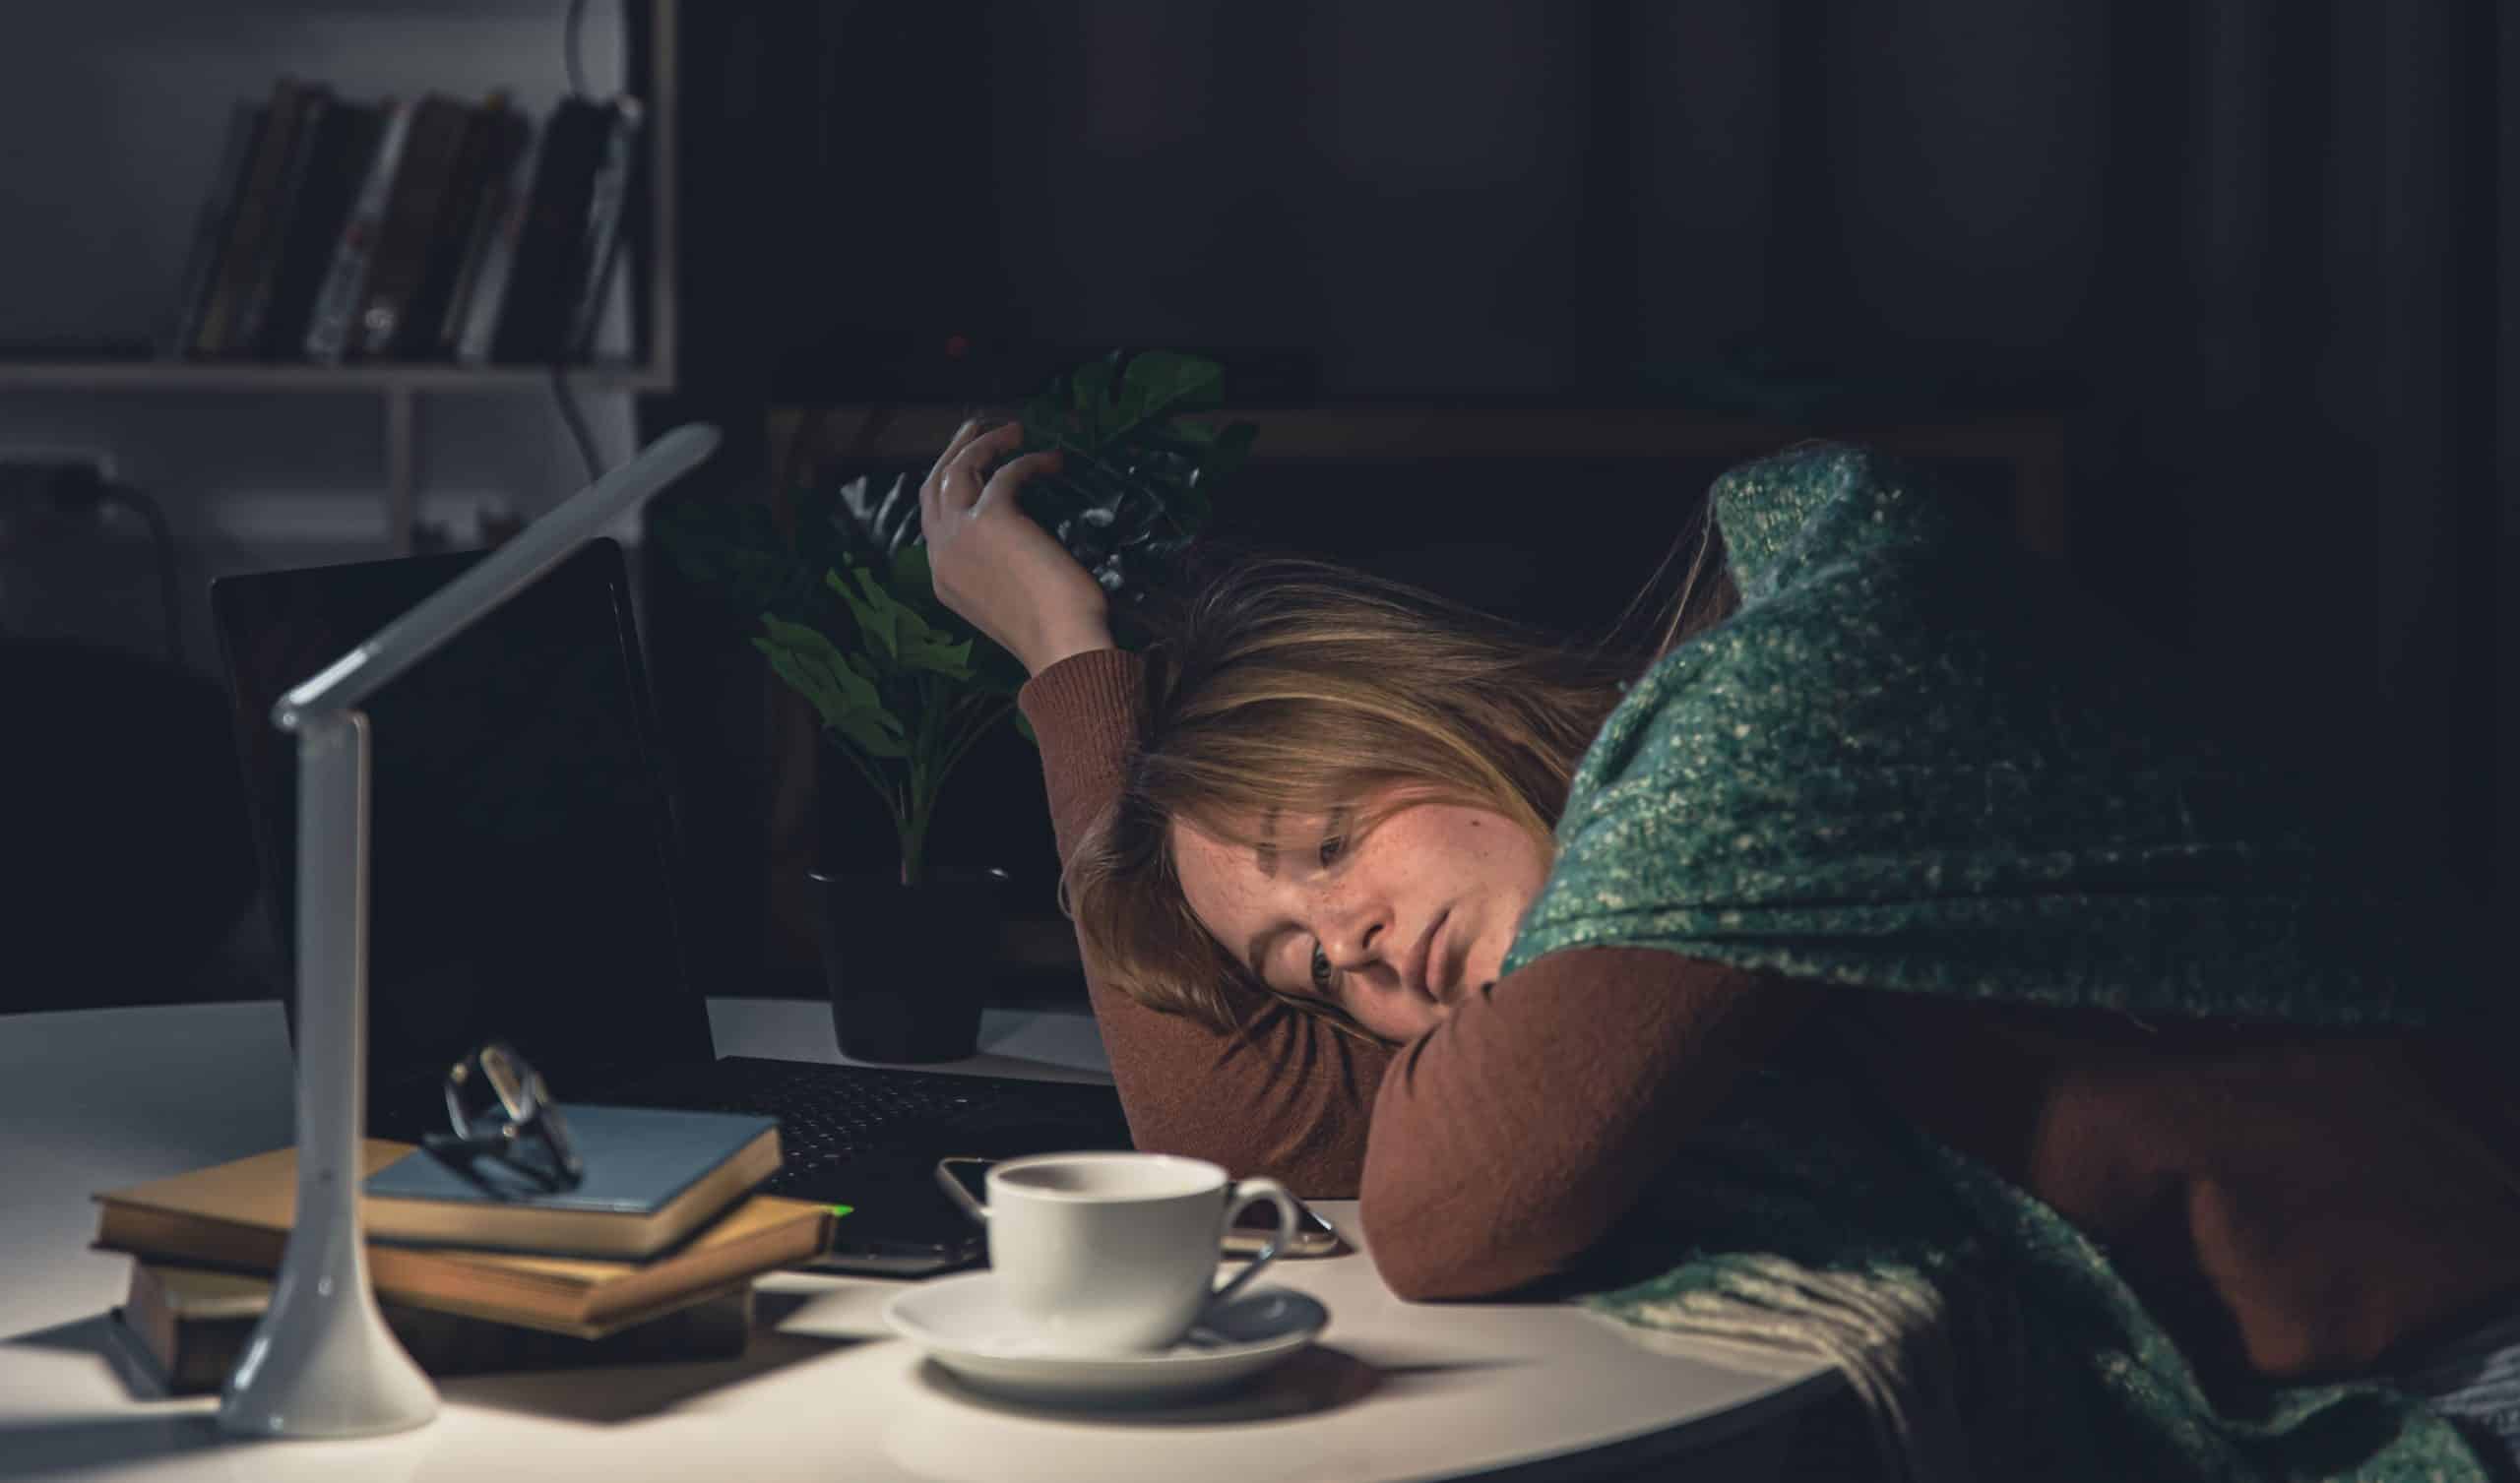 A person laying on the work desk unable to fall asleep due to a psychological disorder called insomnia.